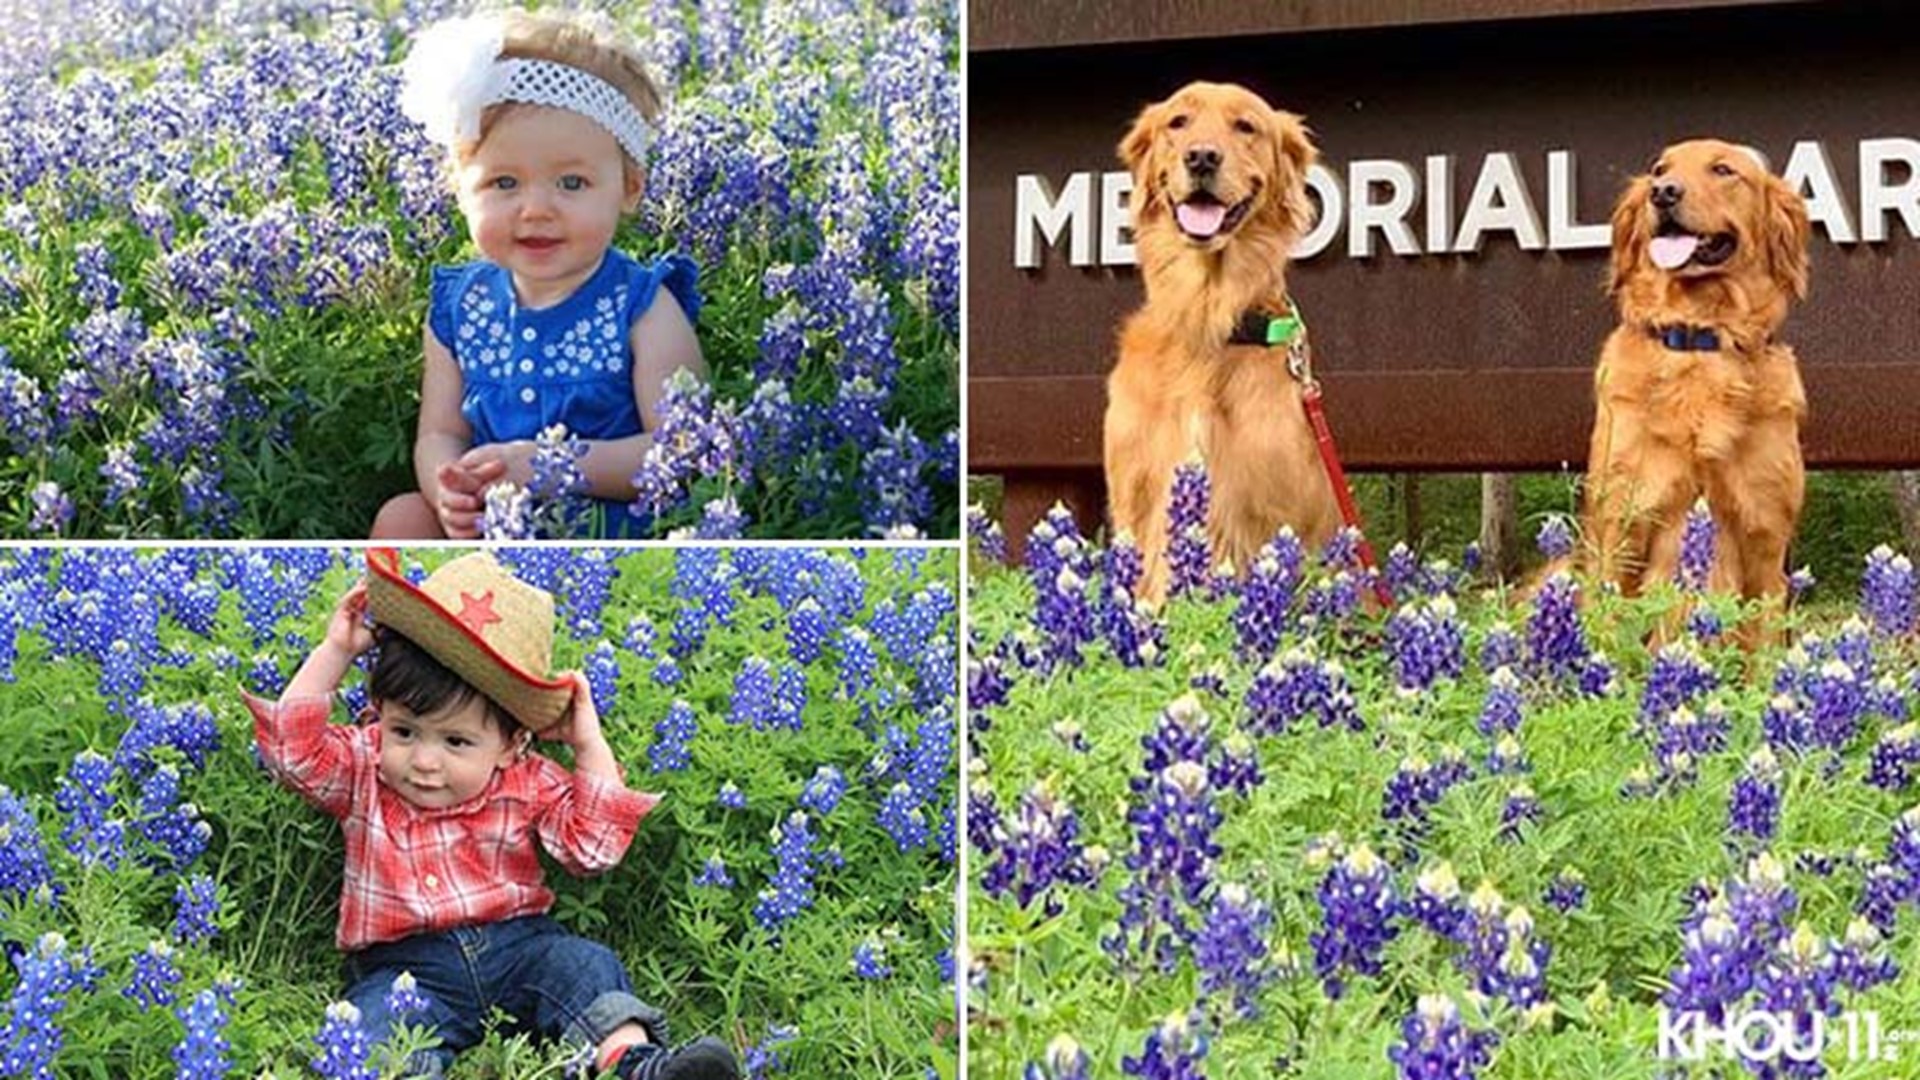 It's a Texas tradition dating back as old as the hills: posing in patches of pretty bluebonnets. These photos were shared by our KHOU11 viewers.